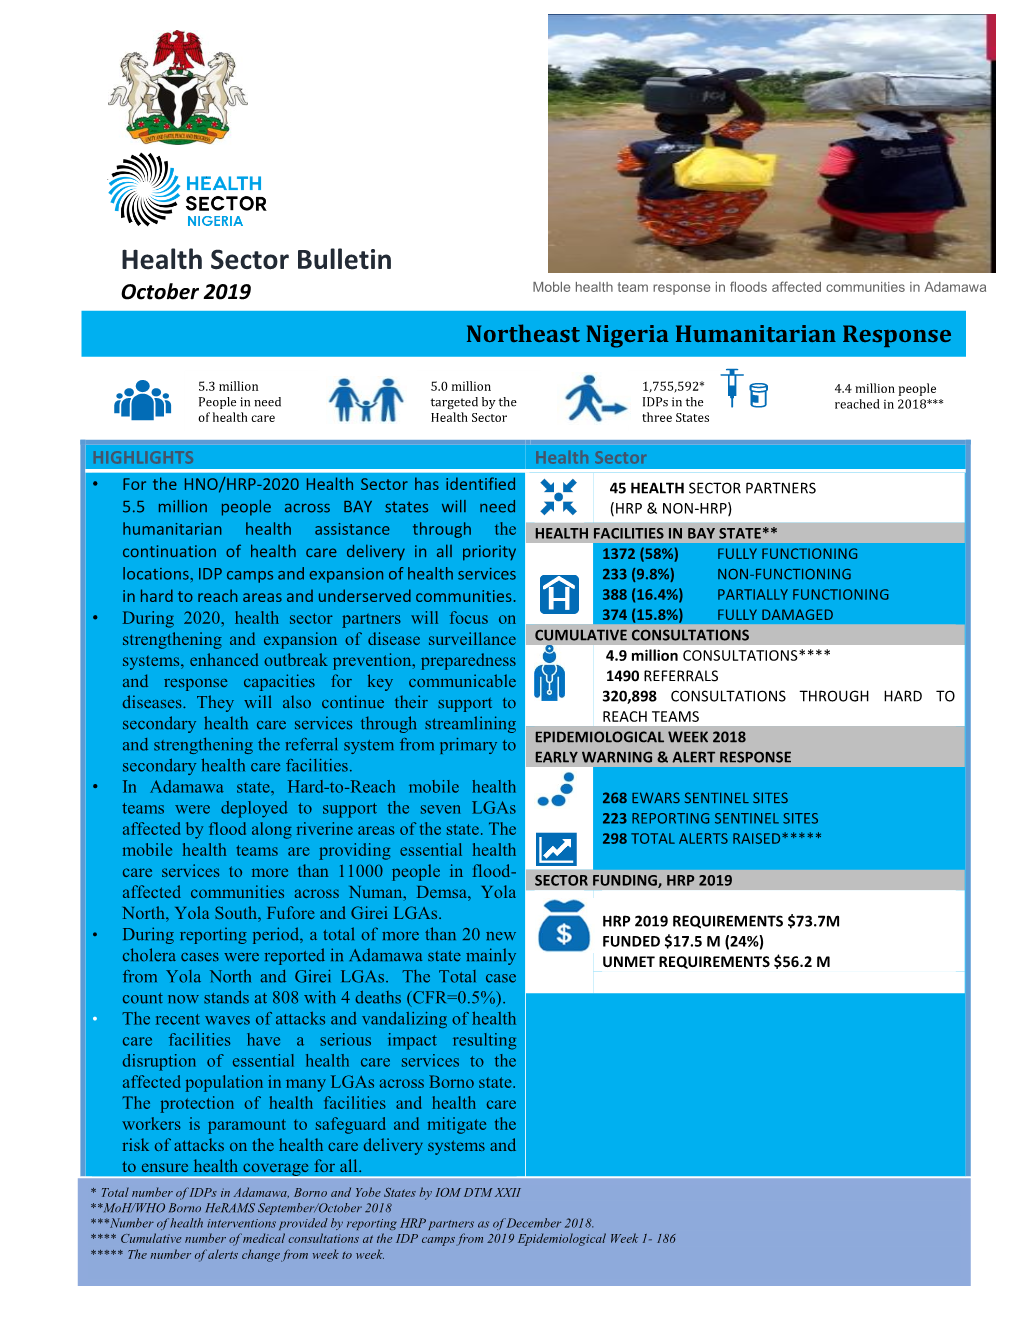 Health Sector Bulletin Moble Health Team Response in Floods Affected Communities in Adamawa October 2019 State Northeast Nigeria Humanitarian Response